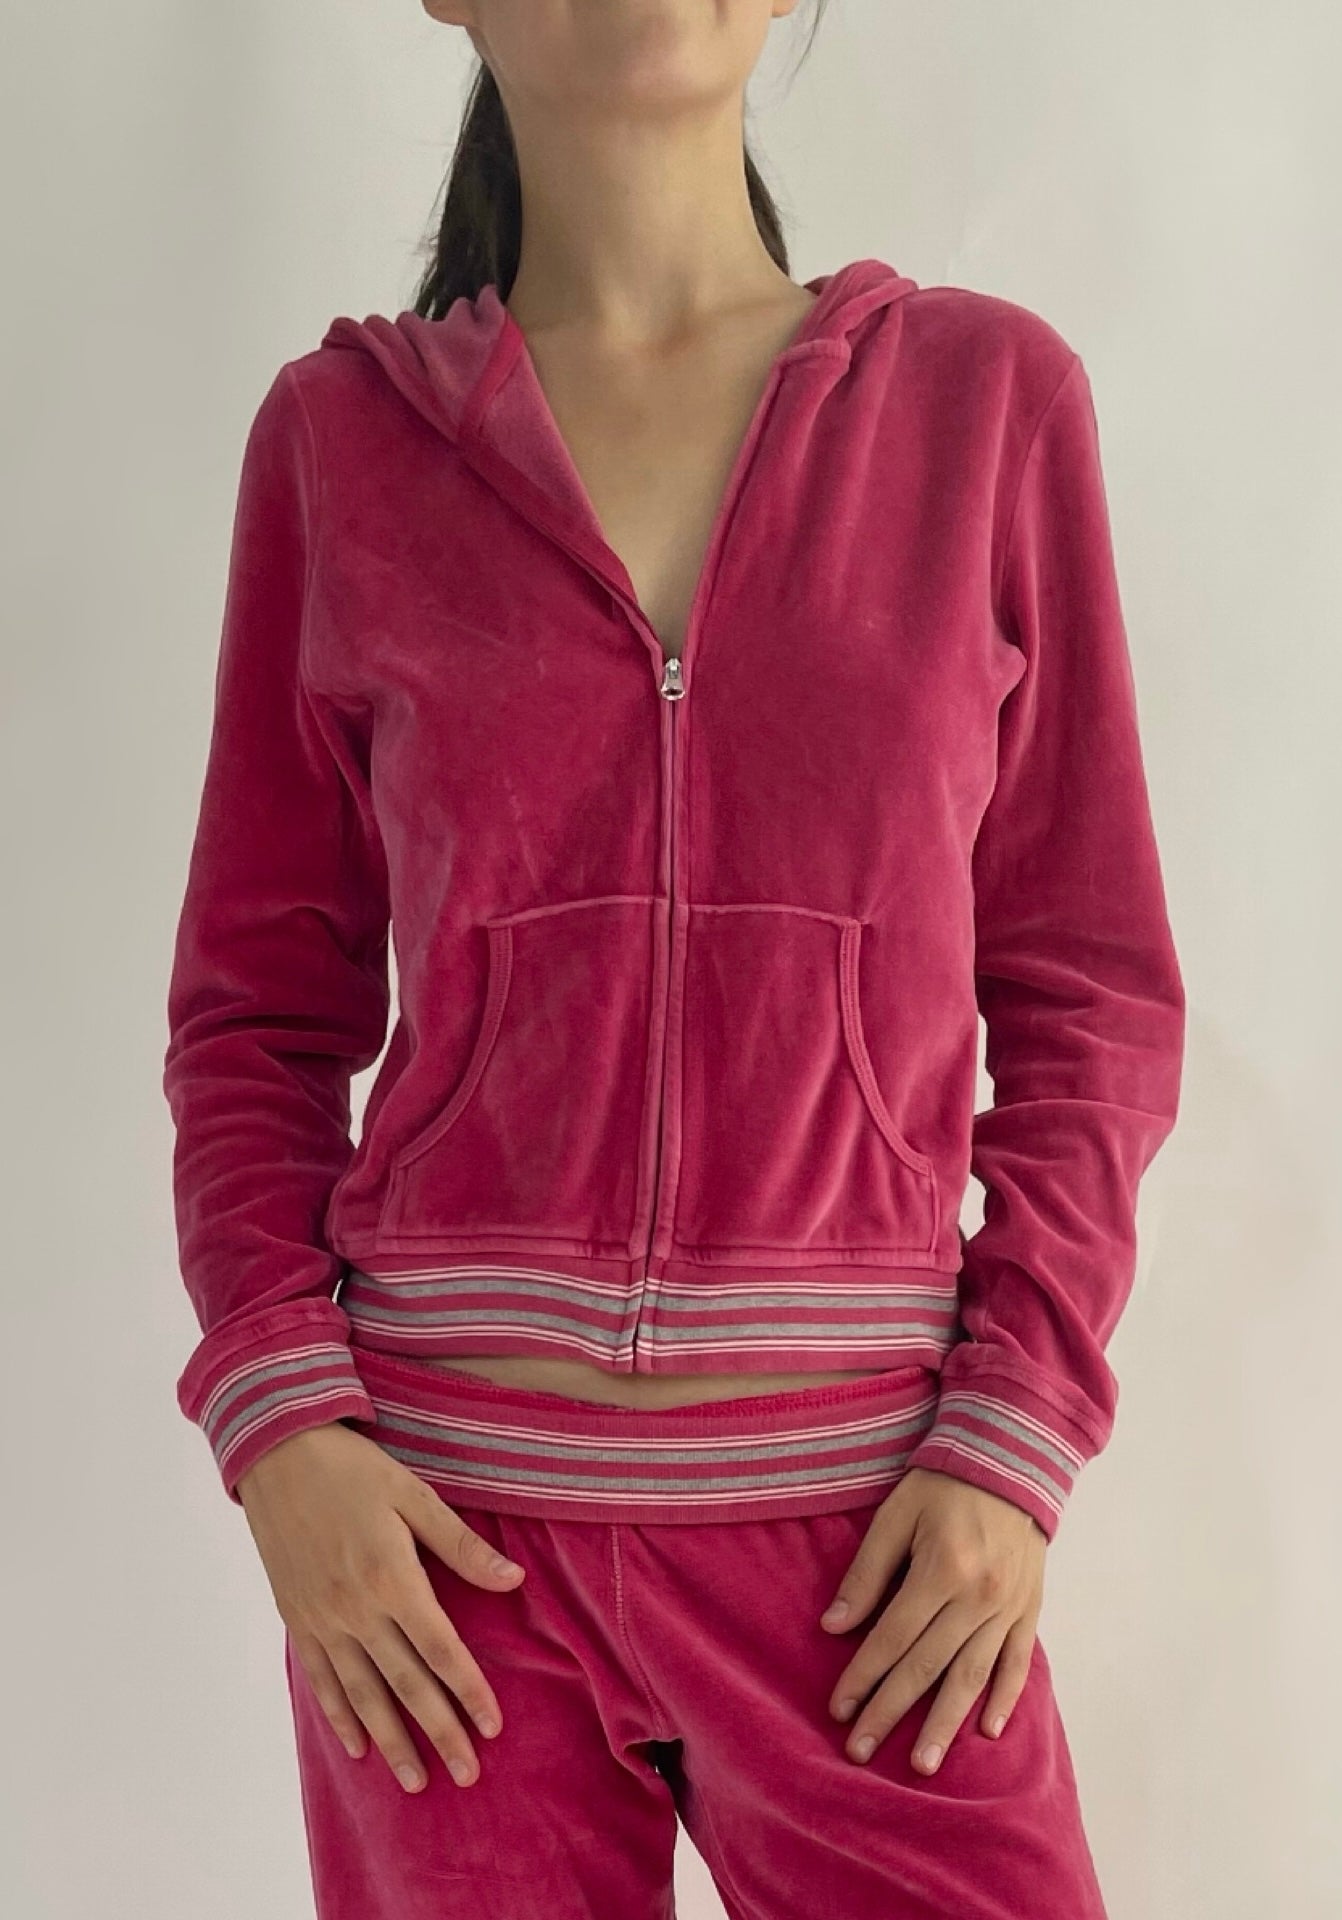 Early 2000s pink velour set by GAP